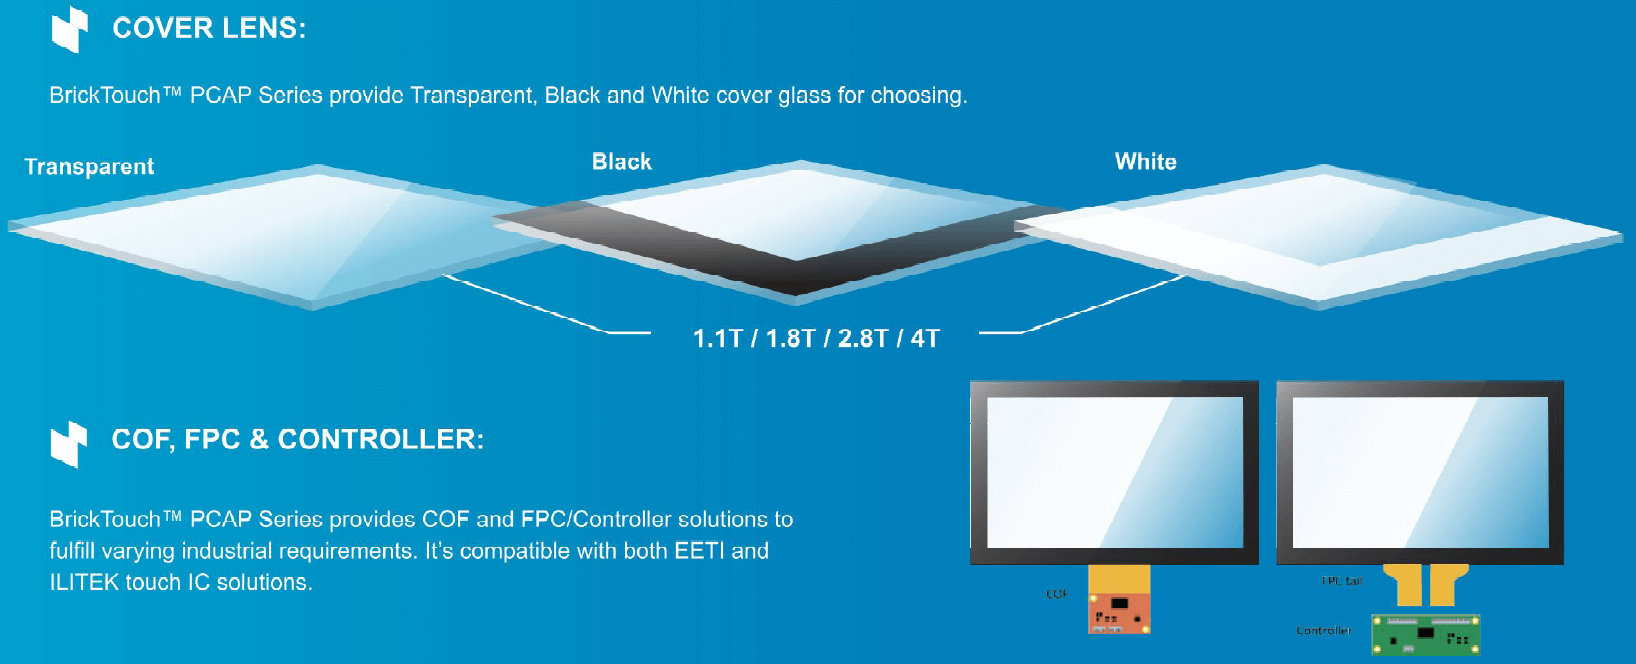 BrickTouch PCAP Series touch panel glass